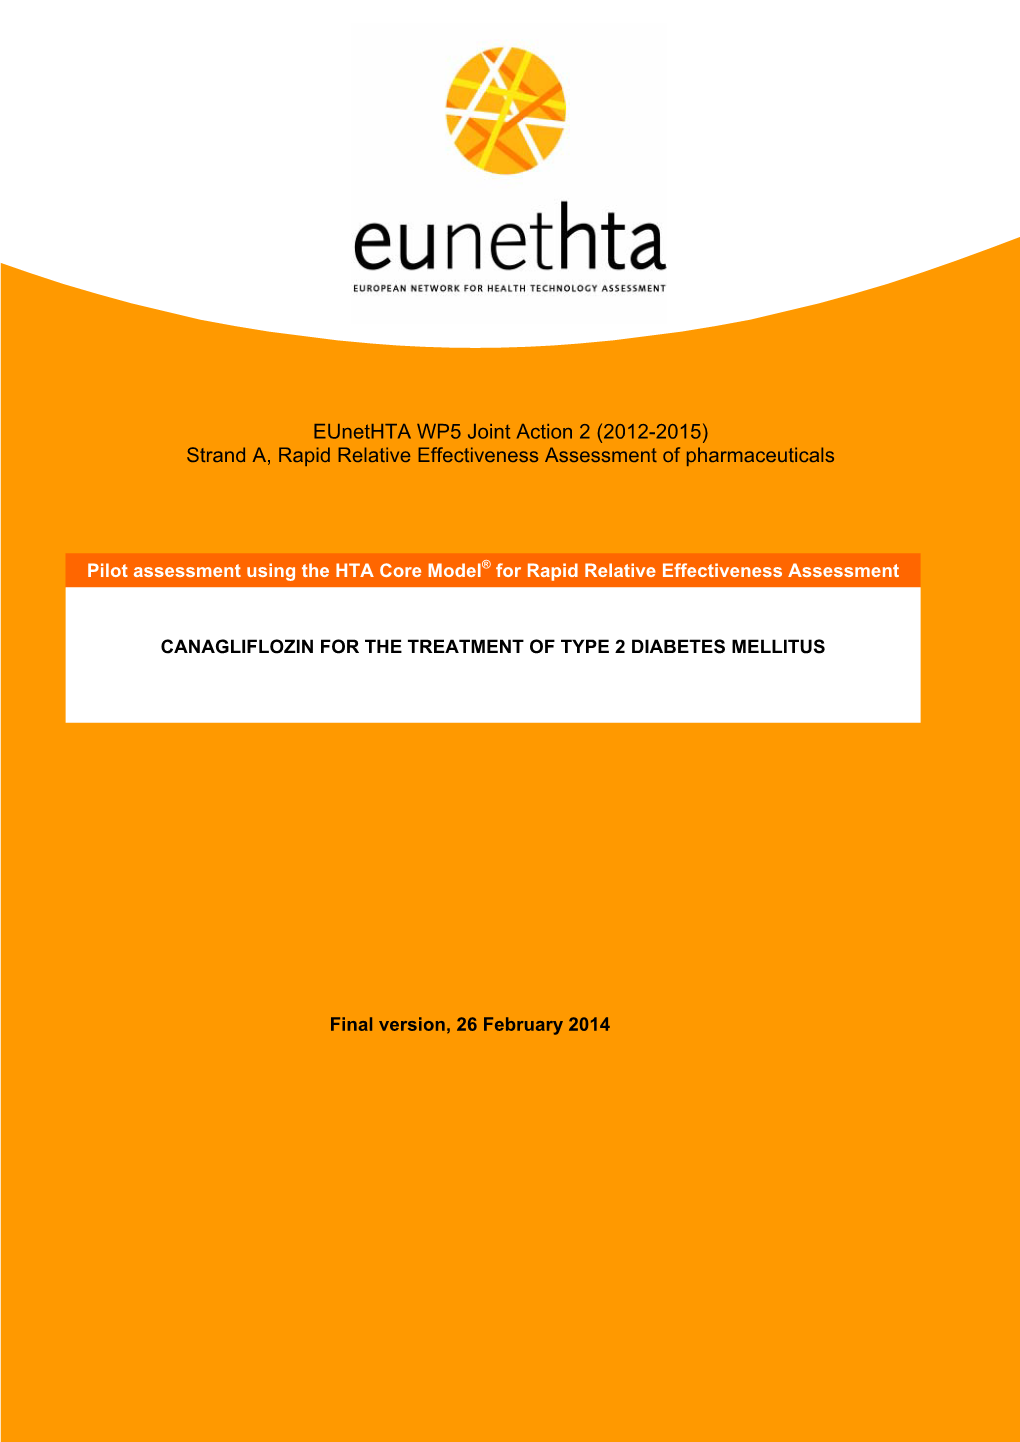 Eunethta WP5 Joint Action 2 (2012-2015) Strand A, Rapid Relative Effectiveness Assessment of Pharmaceuticals